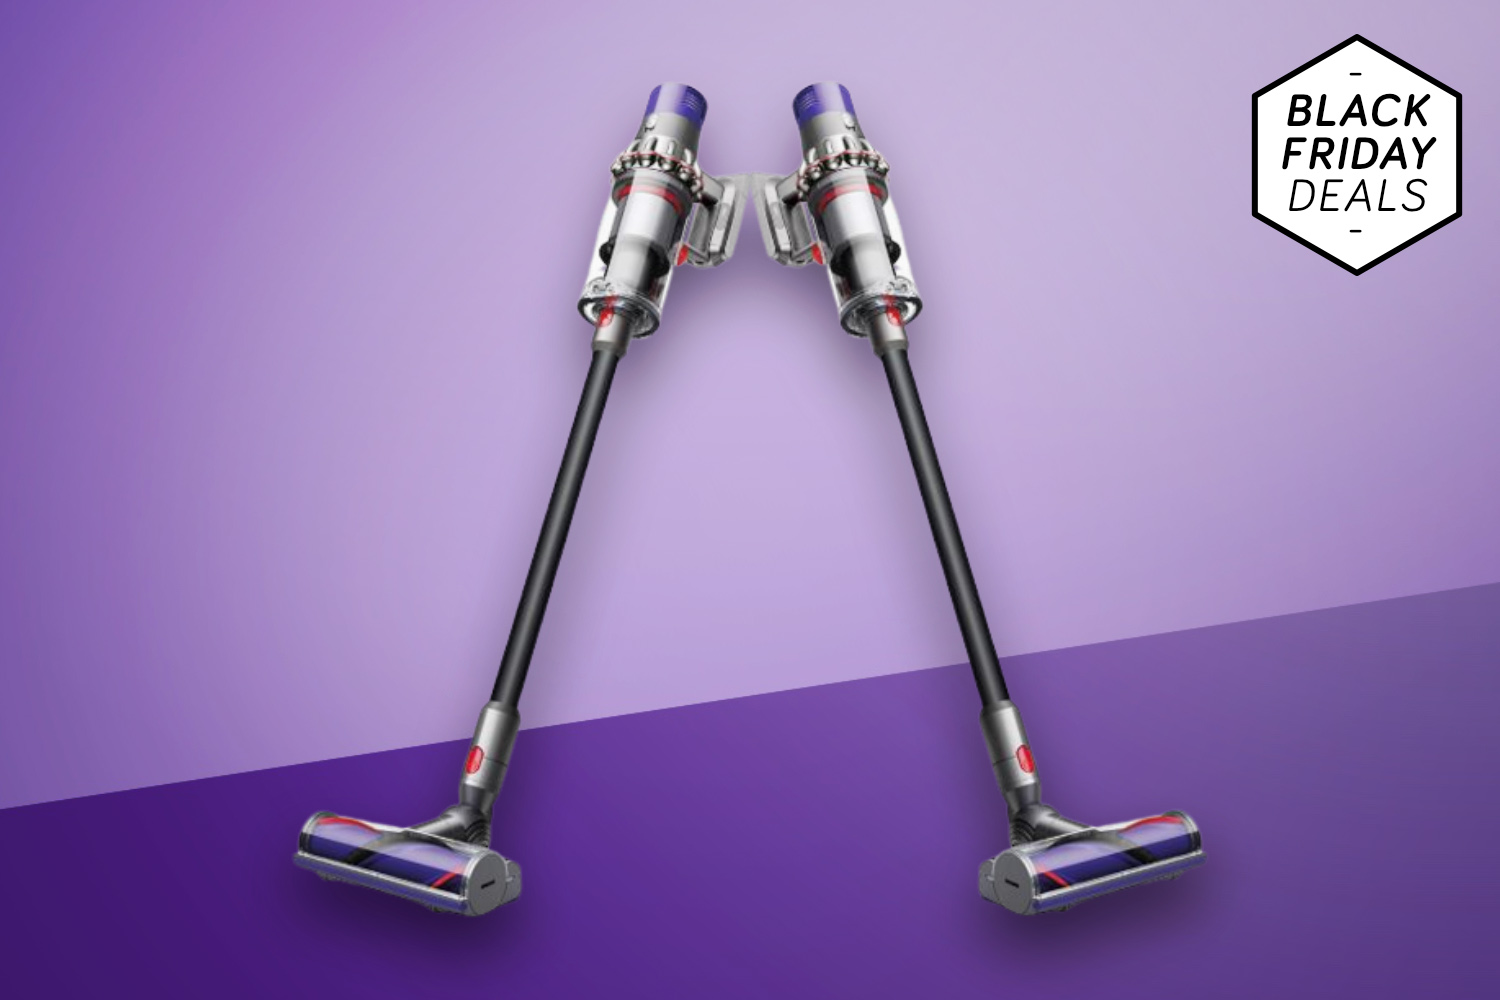 Clean up with £100 off Dyson's V10 Total Clean vacuum this Black Friday